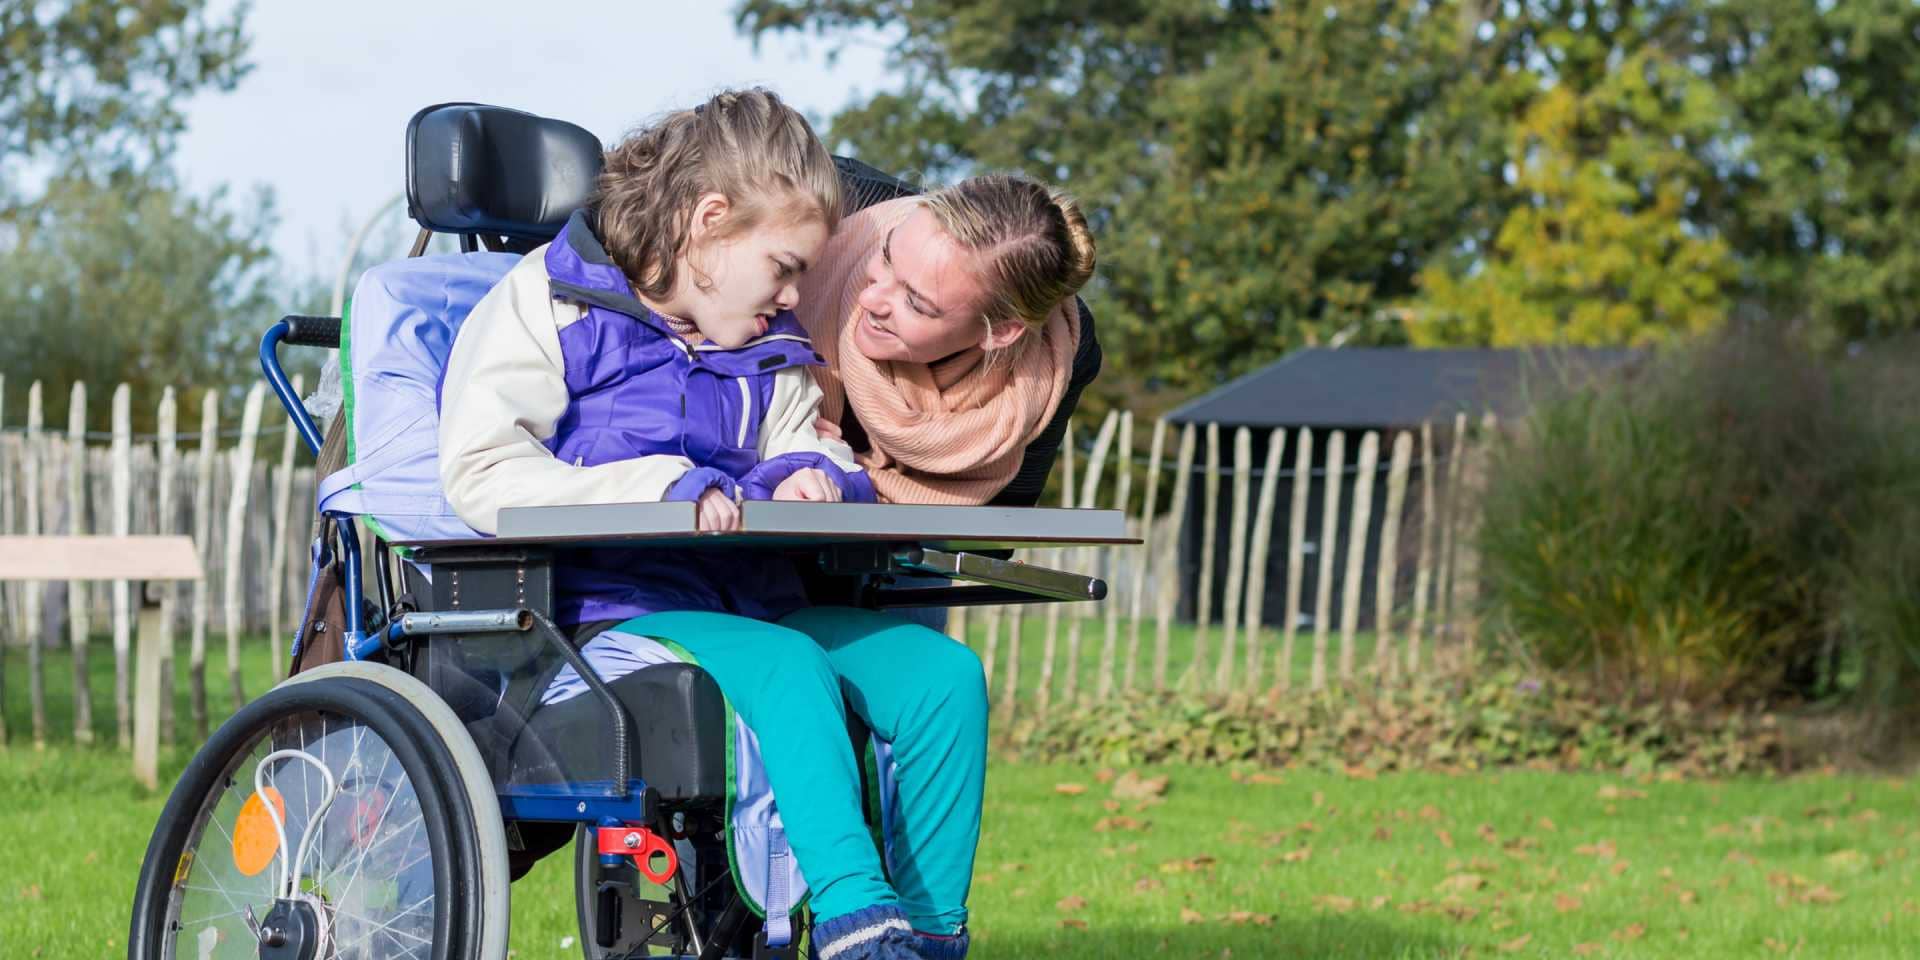 A support worker leans in to talk to a young girl who is a wheelchair user.